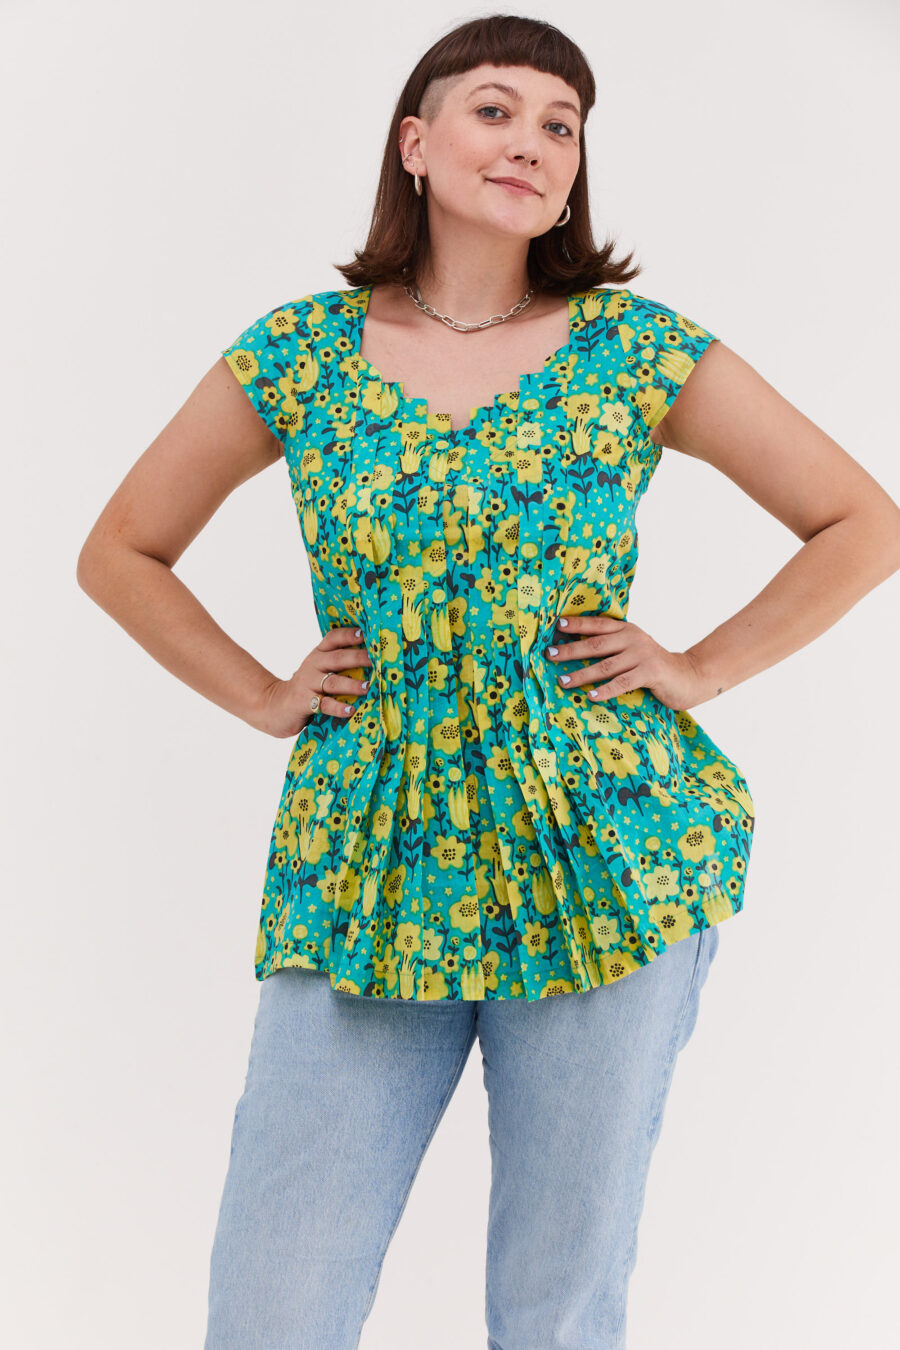 Serena tunic | Uniquely designed black dress – Optimism print, tourquise tunic with yellow flowers print by Comfort Zone Boutique